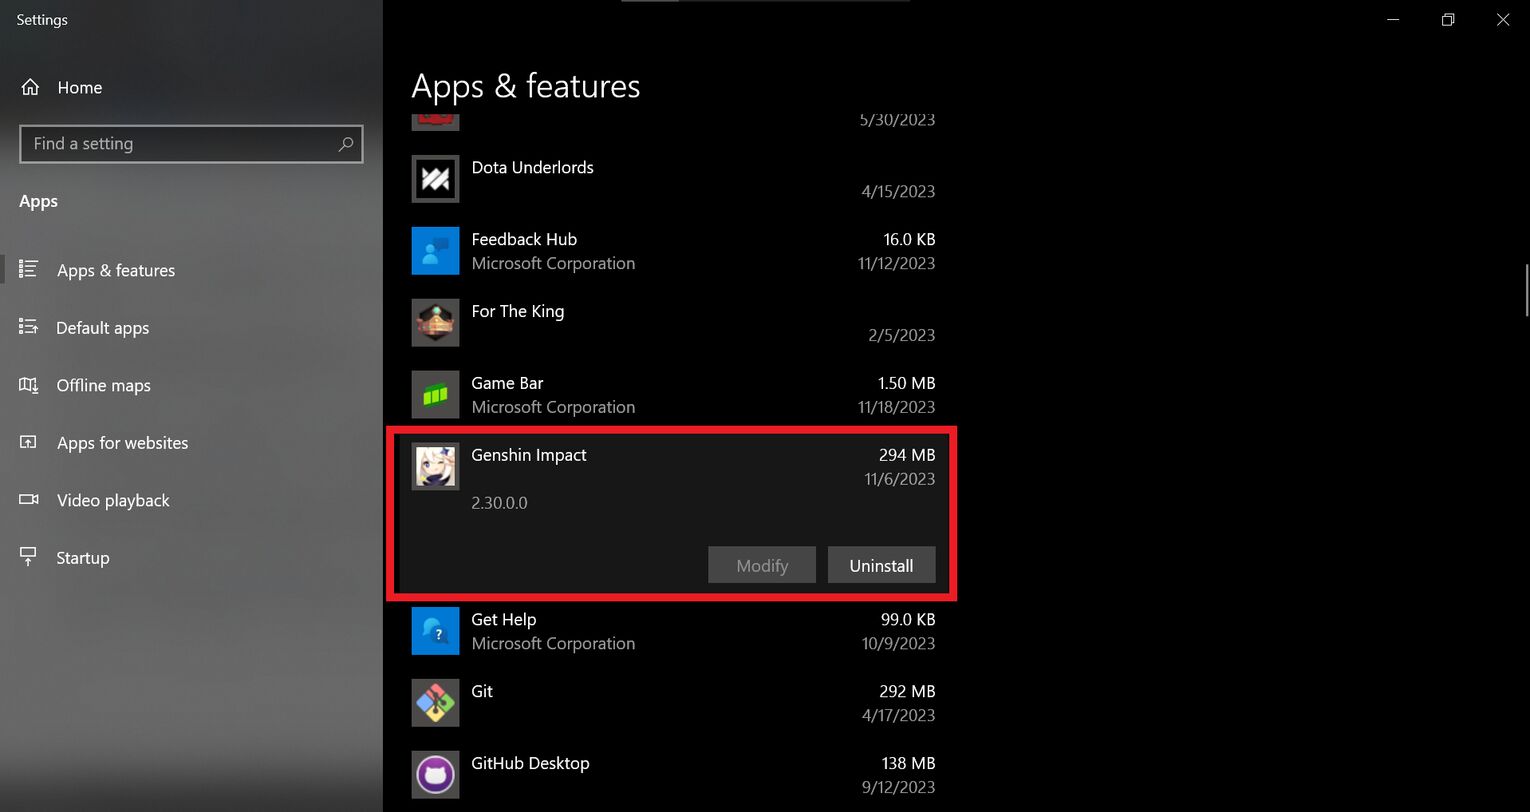 Locate Genshin Impact and click on Uninstall on the Apps and Features window